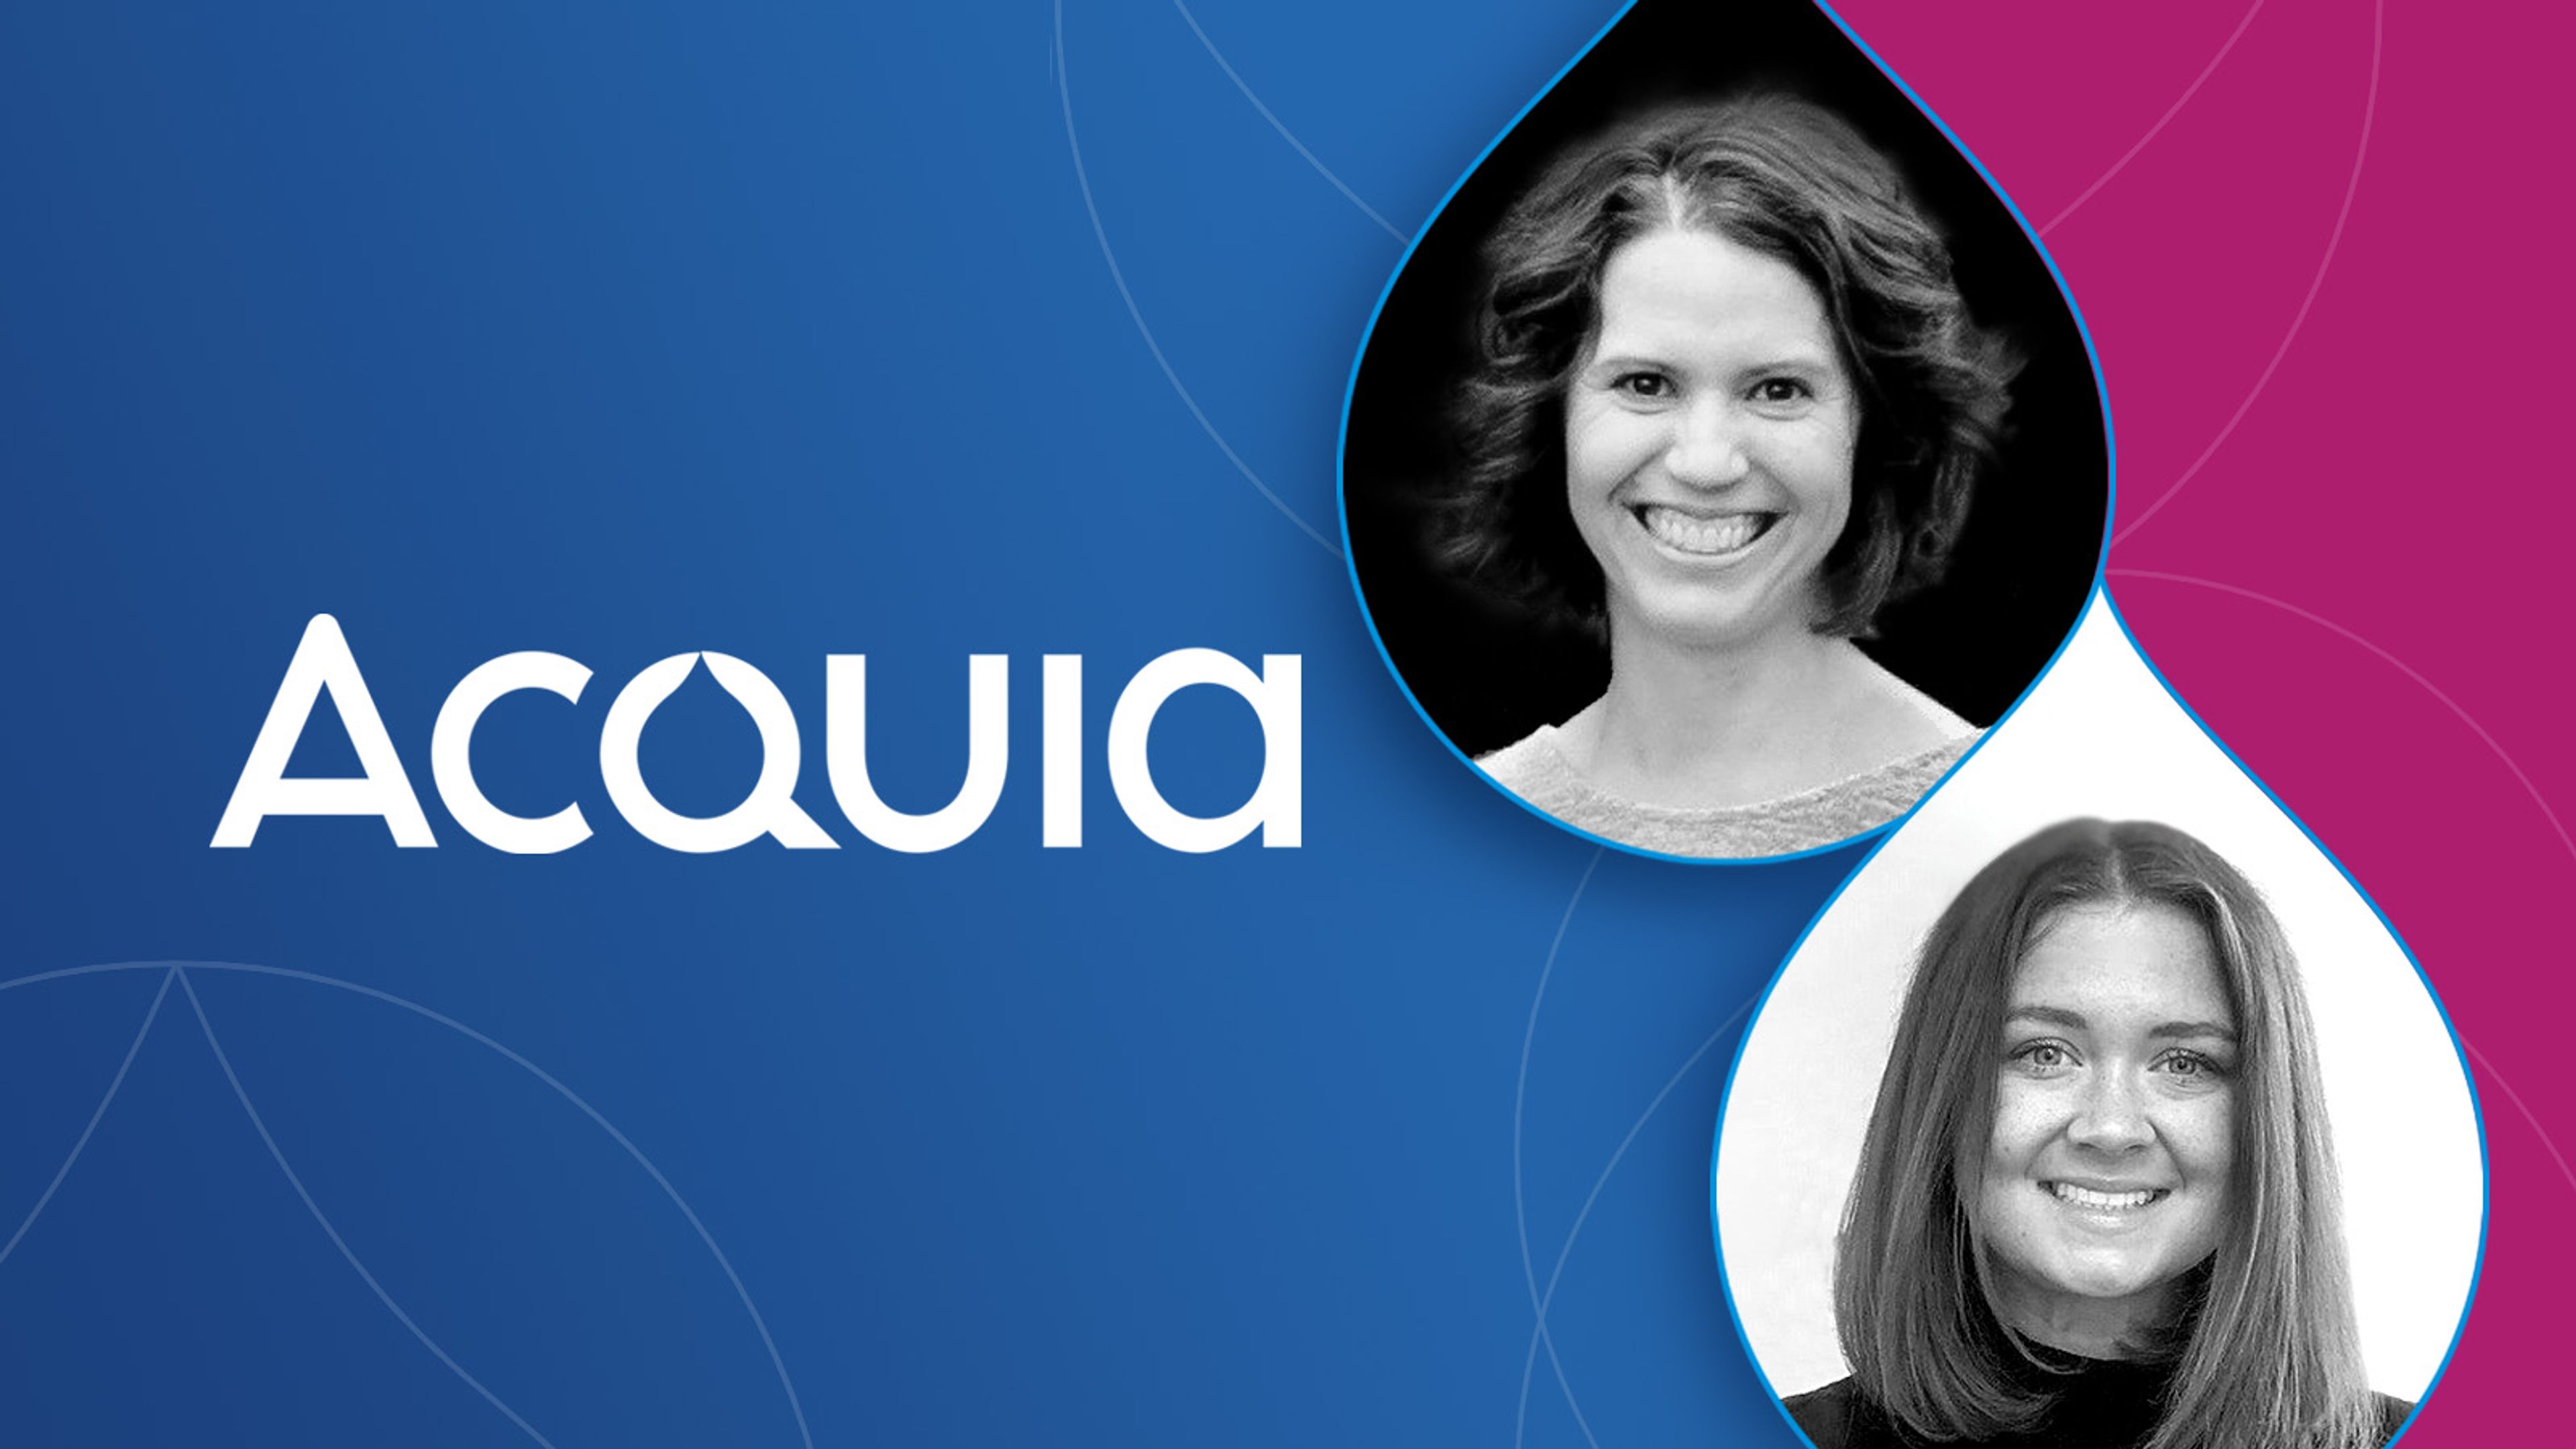 Acquia logo with inset images of Deanna and Maggie in shapes of the Drupal logo icon - a water droplet.